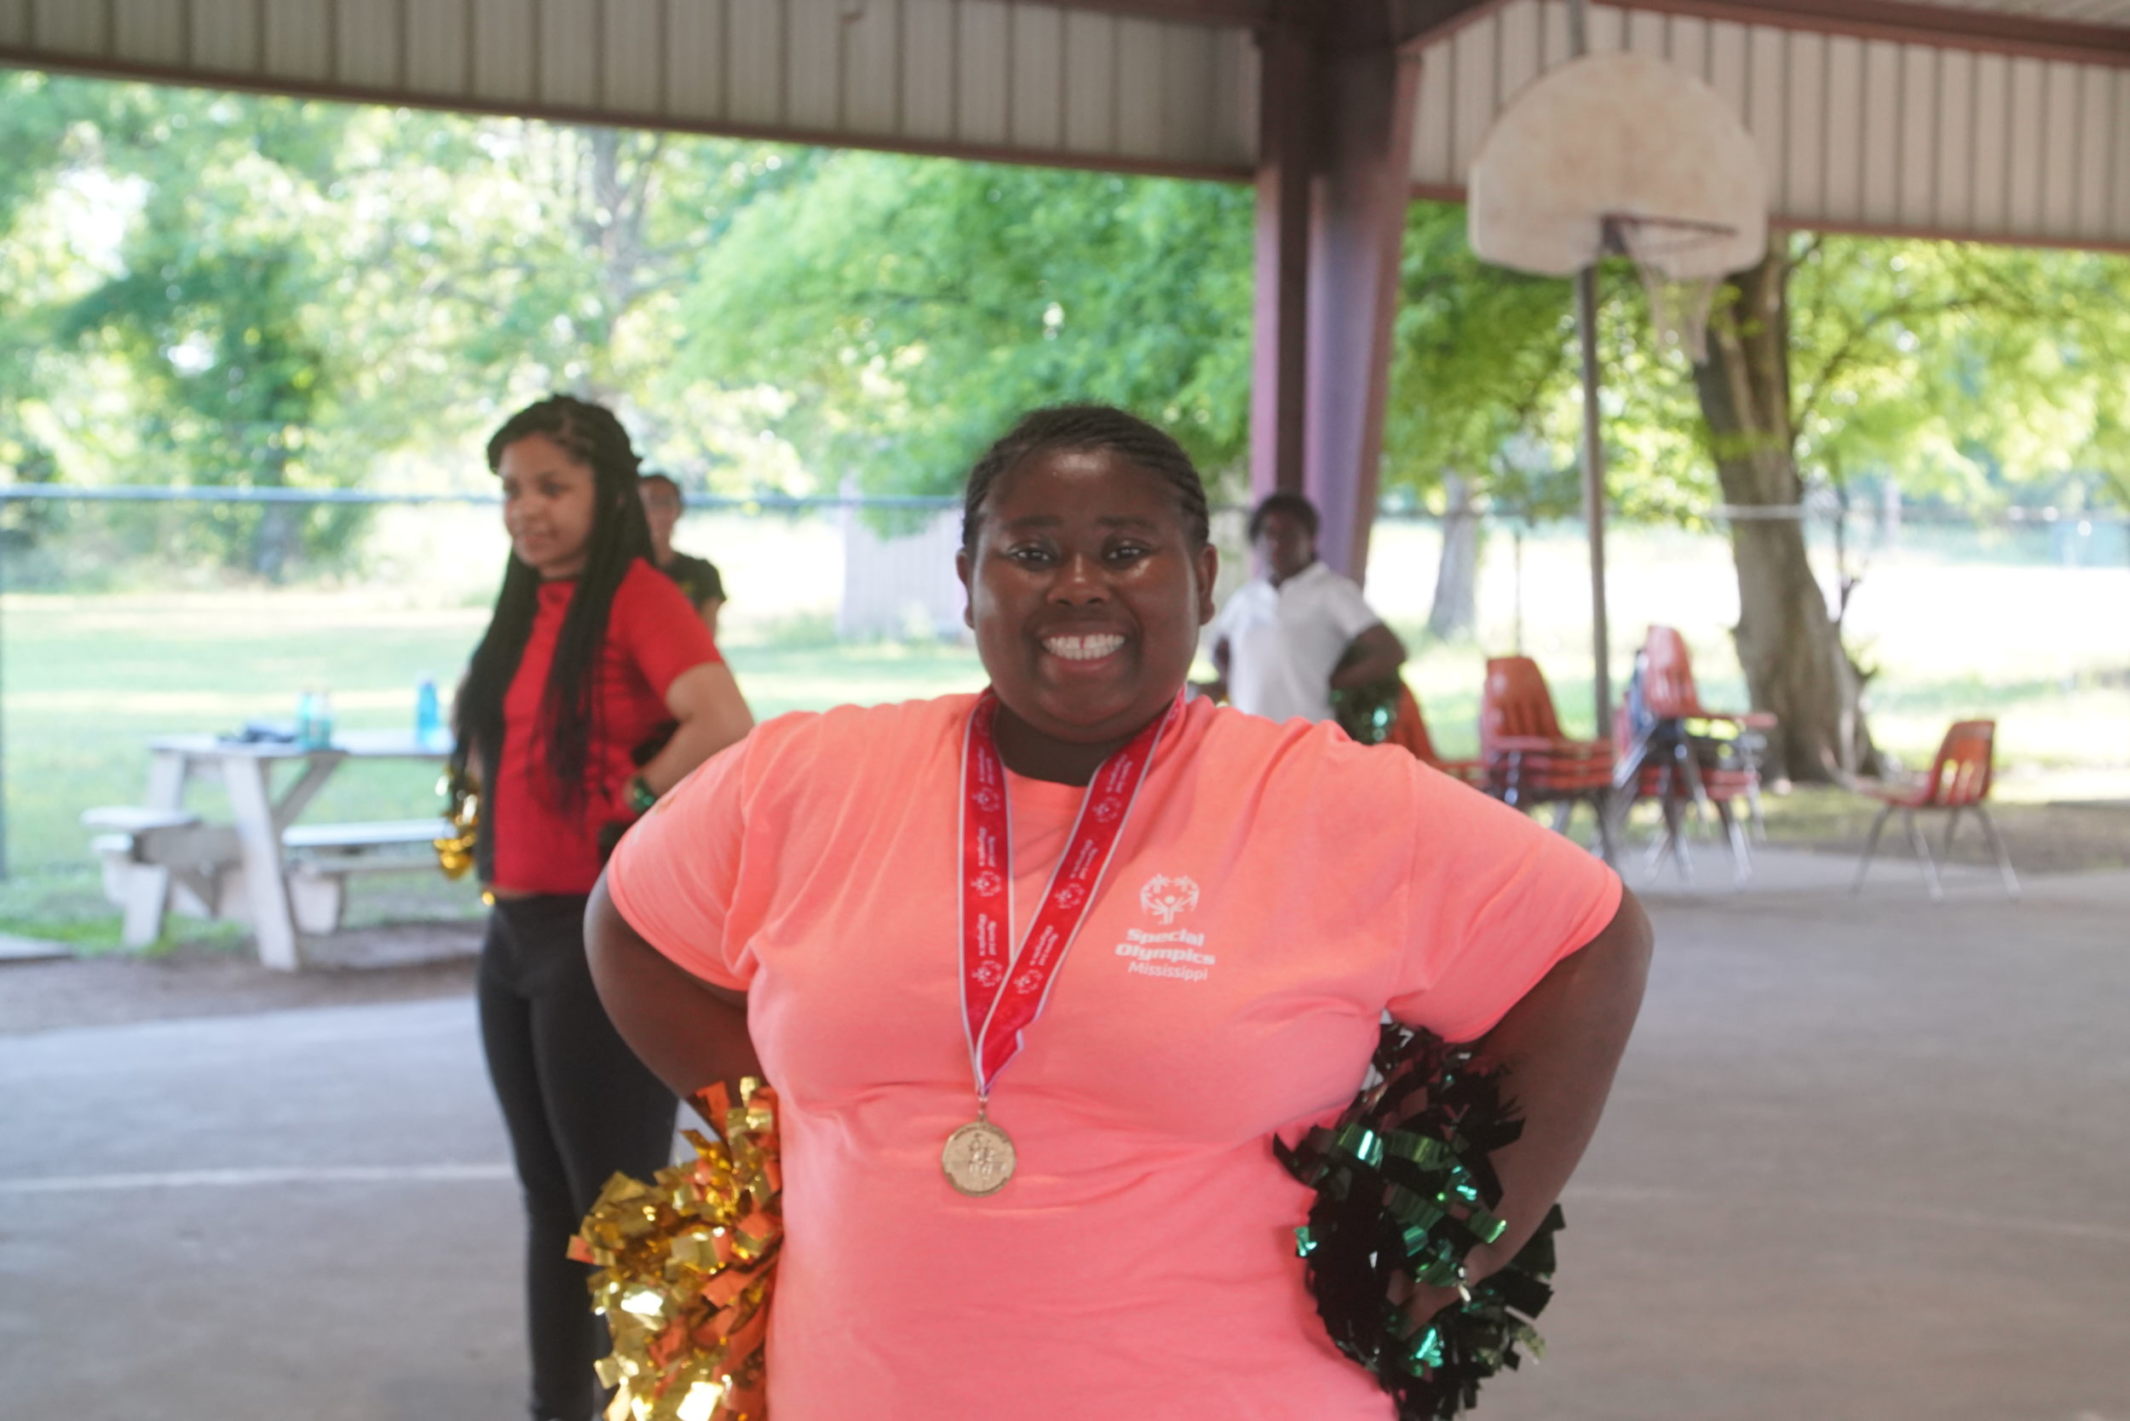 Cheerleader from the Boys & Girls Club of the Mississippi Delta.